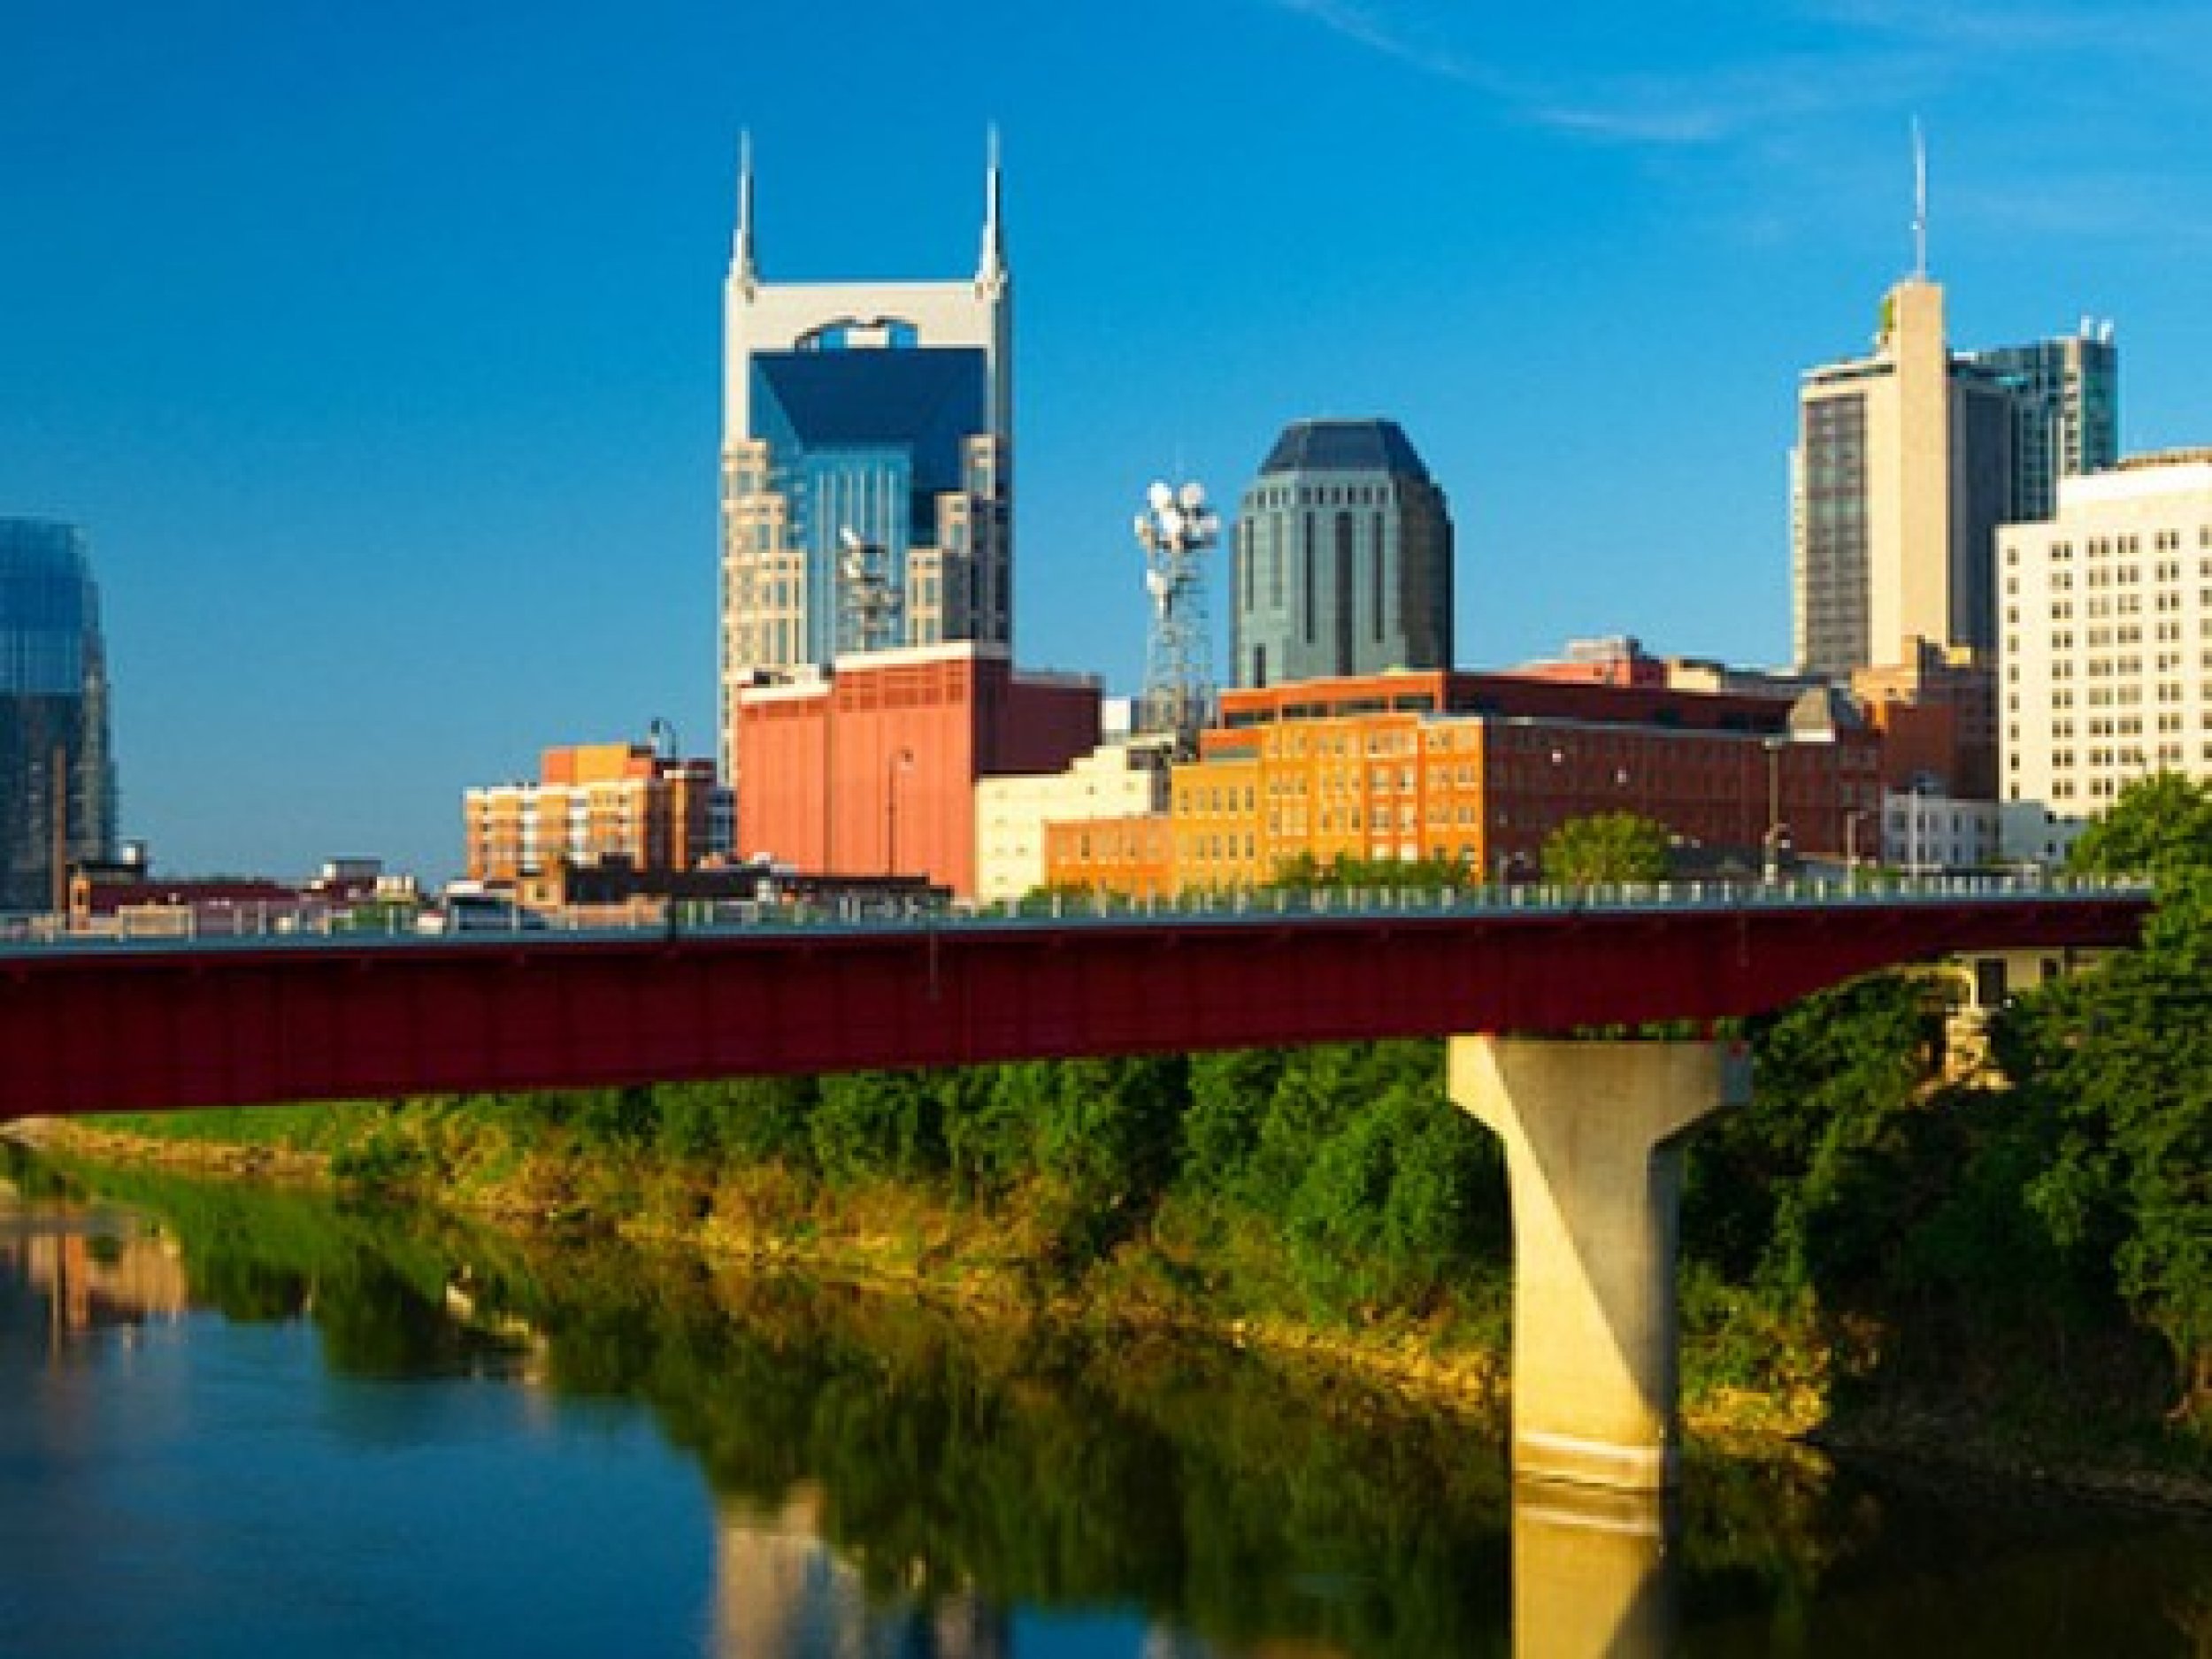 4. Tennessee